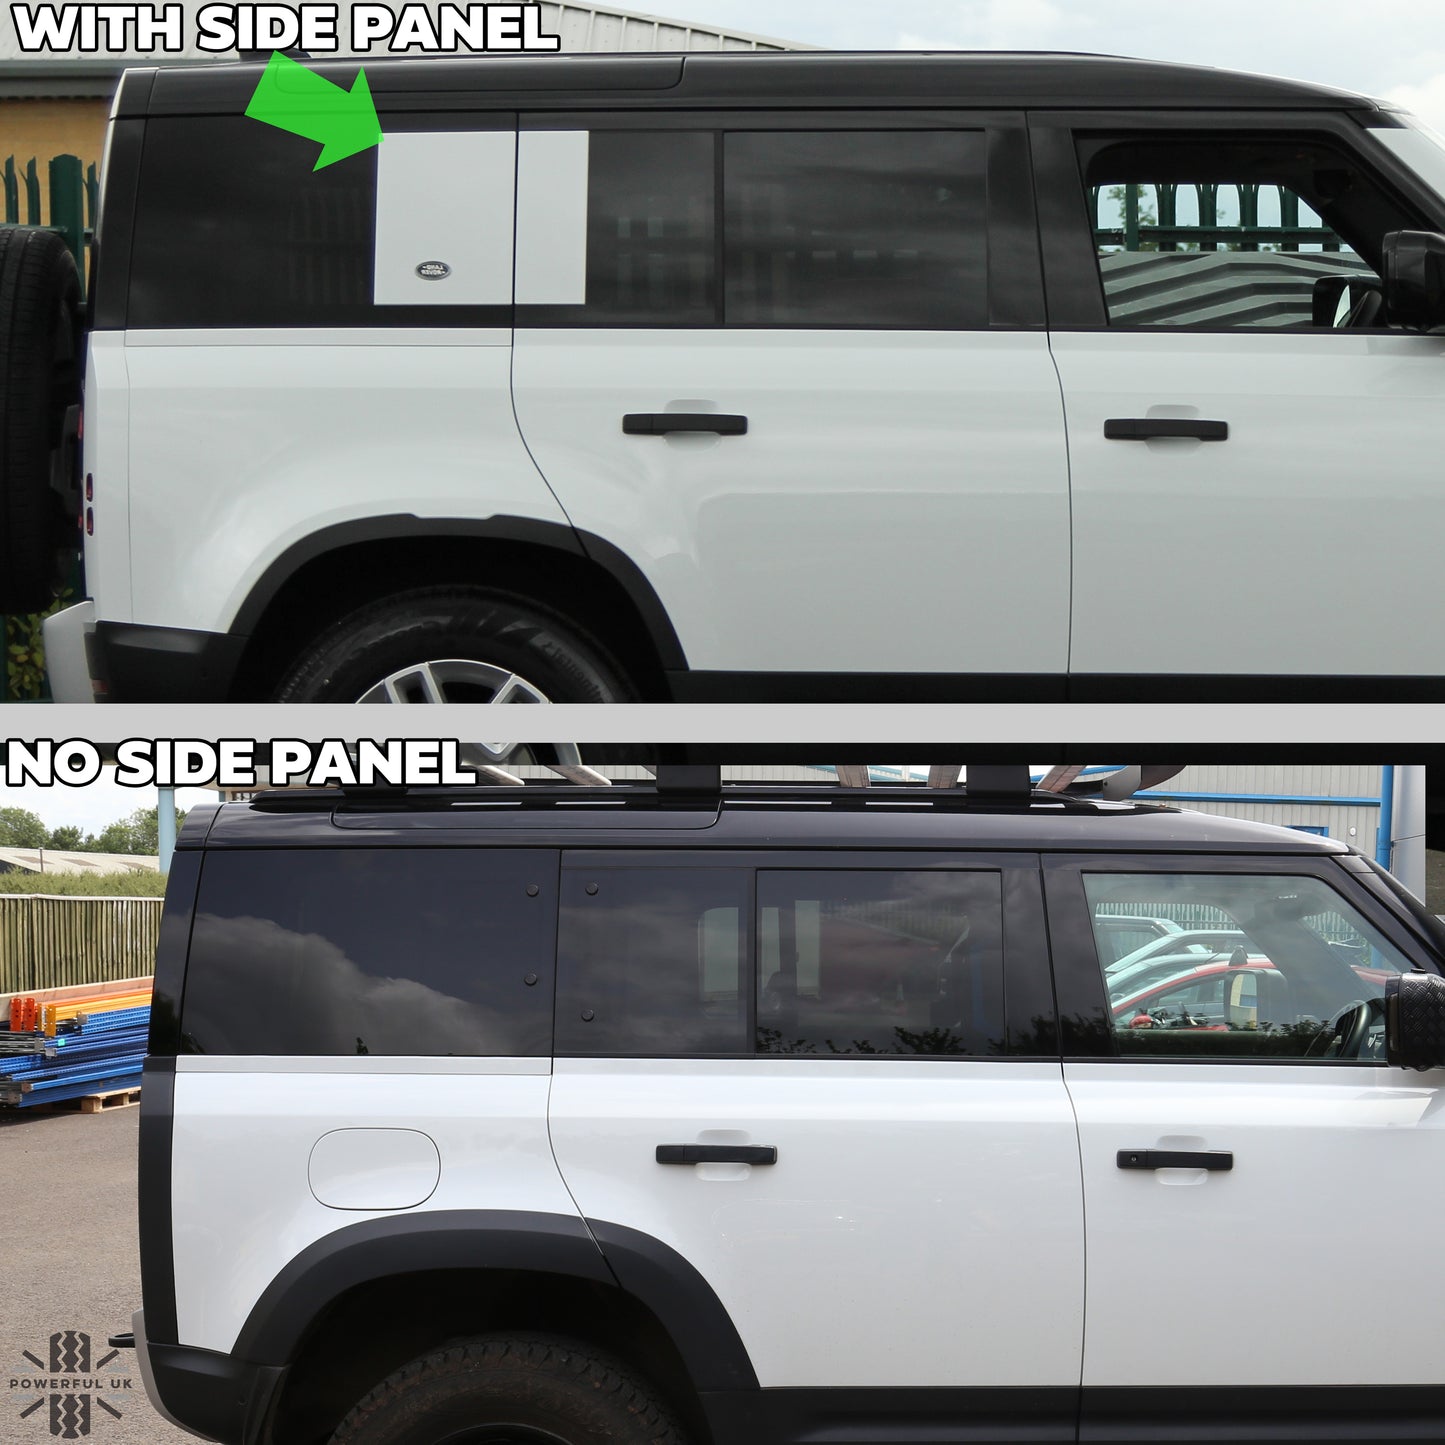 Resin Dome Sticker Kit - Mixed Designs x14 - for Land Rover Defender L663